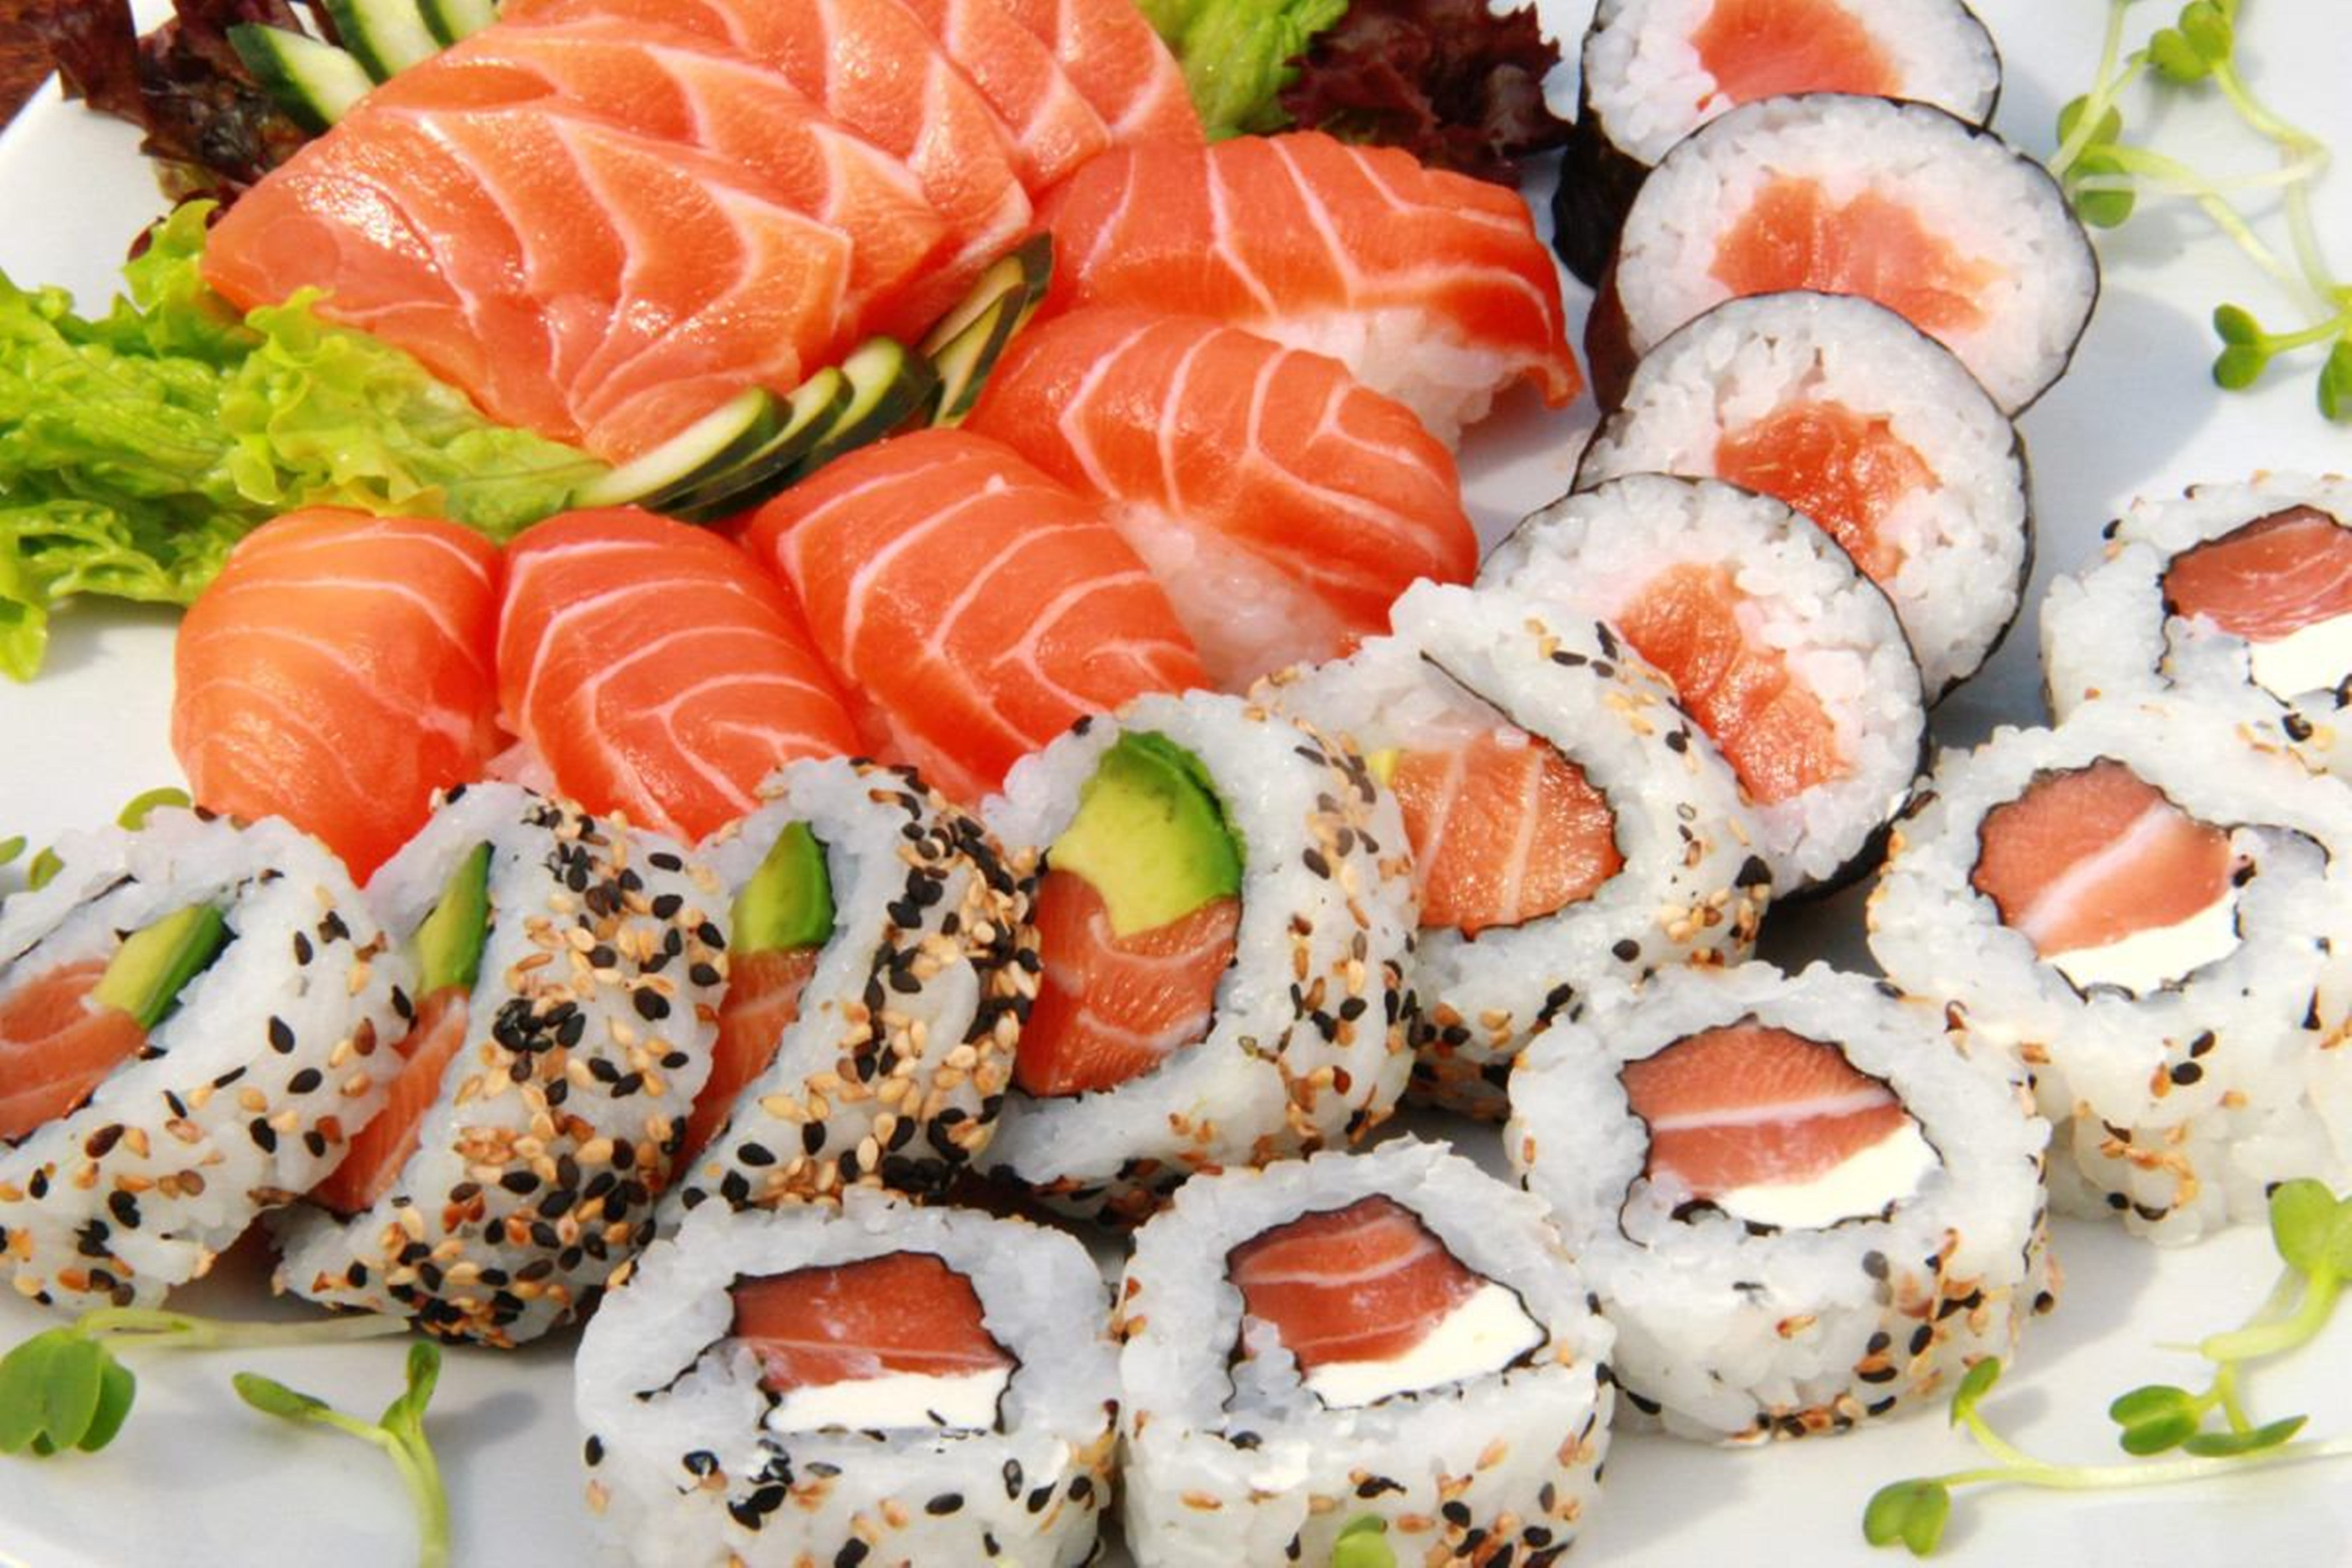 Does your sushi contain parasites? - BugBitten